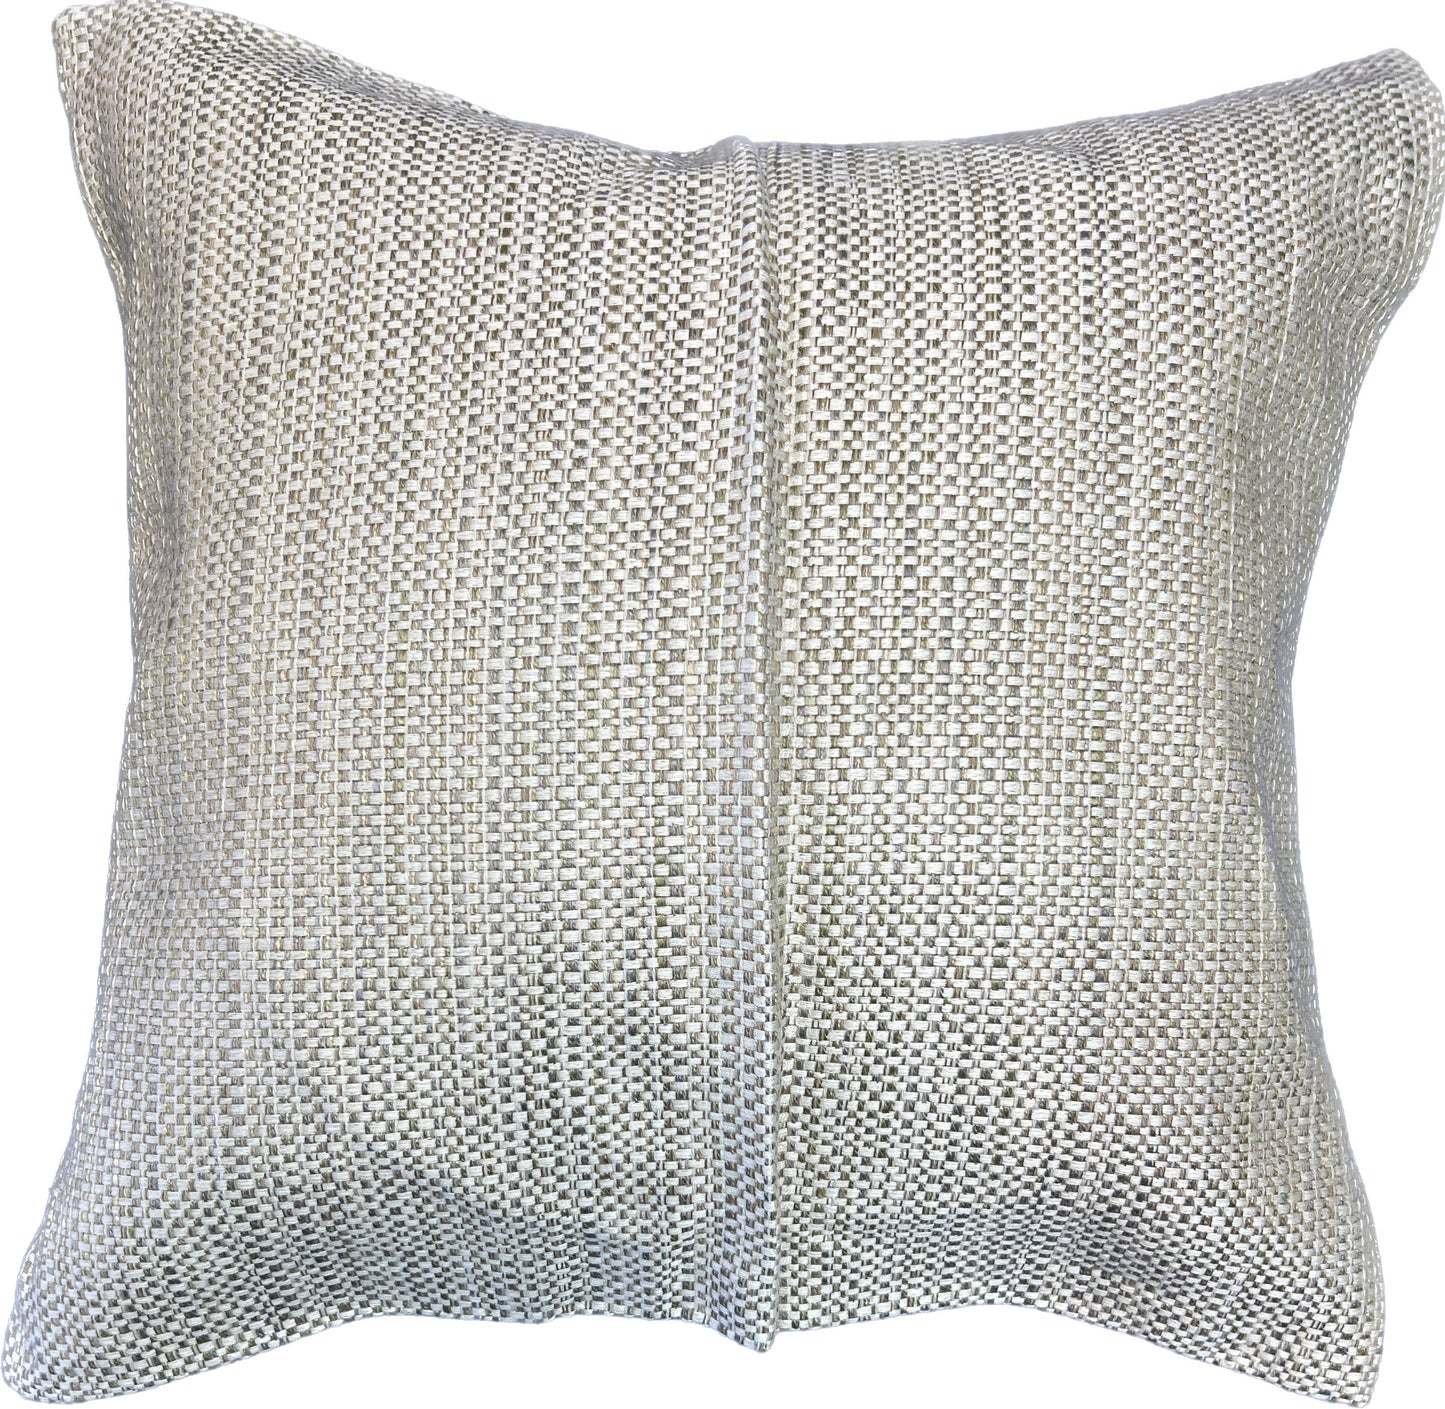 18"x18"  Small Weave Pillow Cover